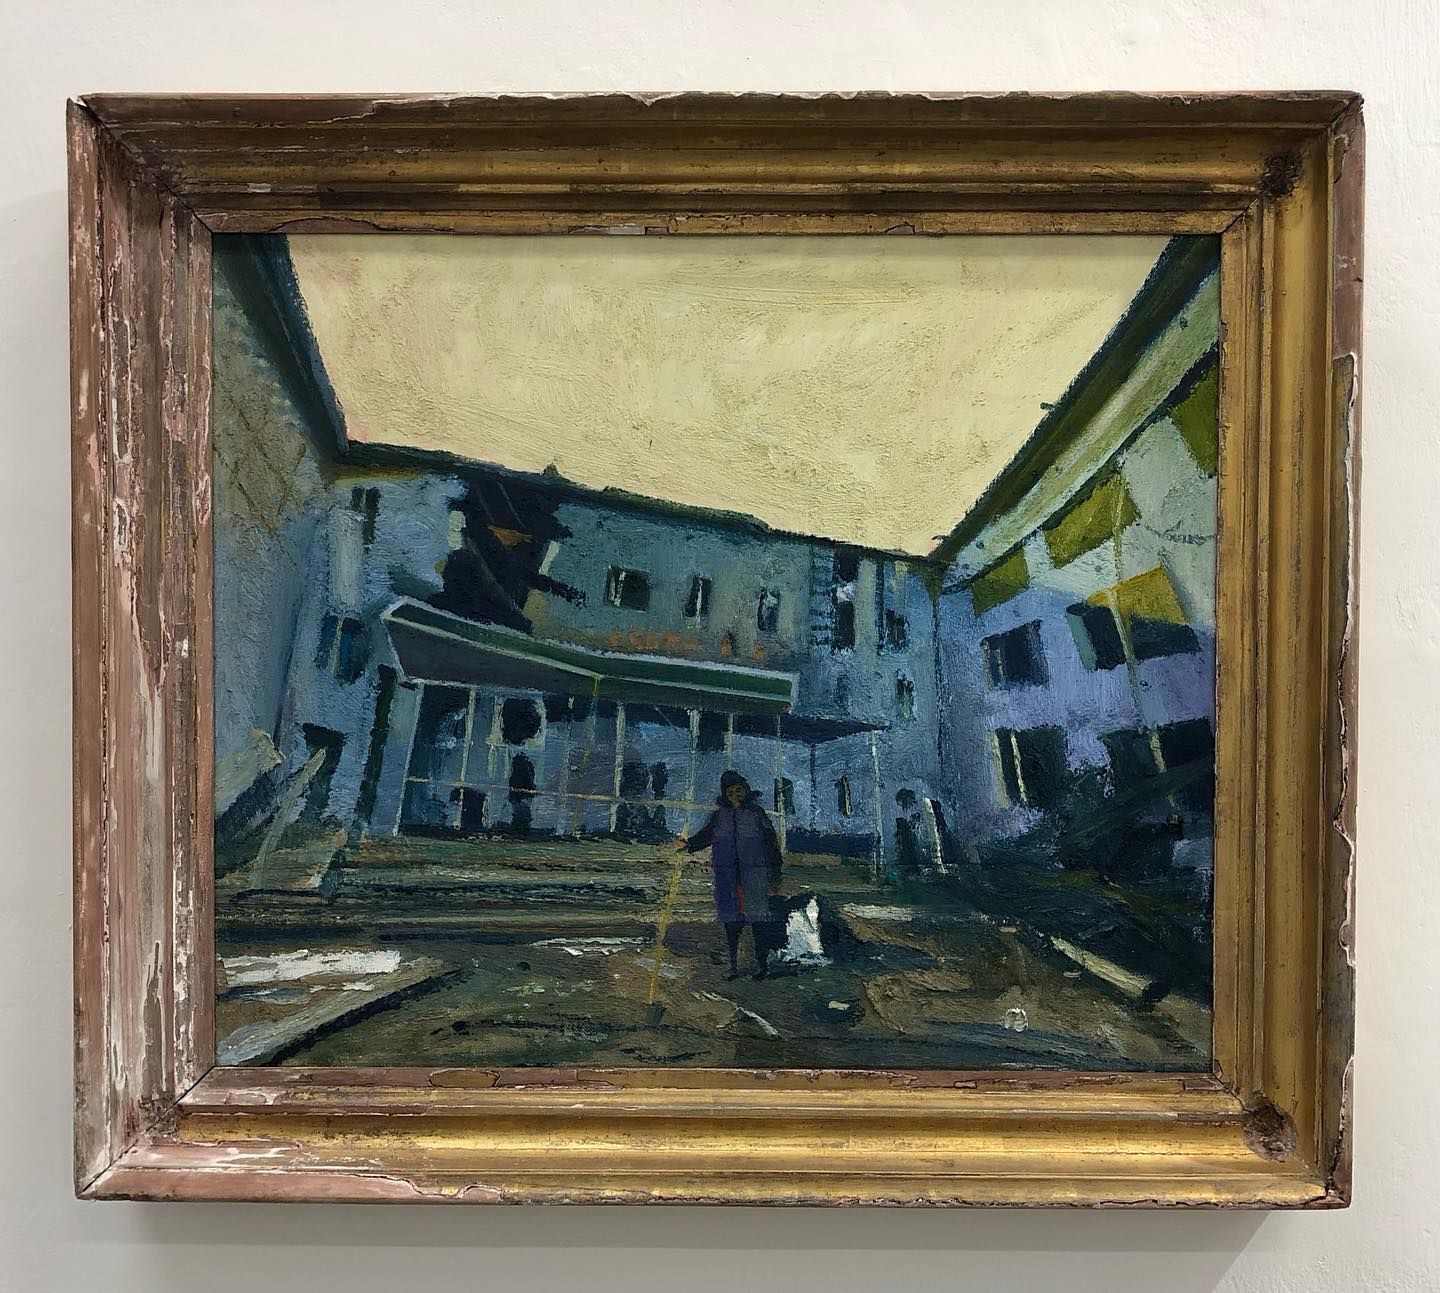 Bombed Hospital, a beautiful painting by Conrad Frankel, available for purchase at the Olivier Cornet Art Gallery Dublin